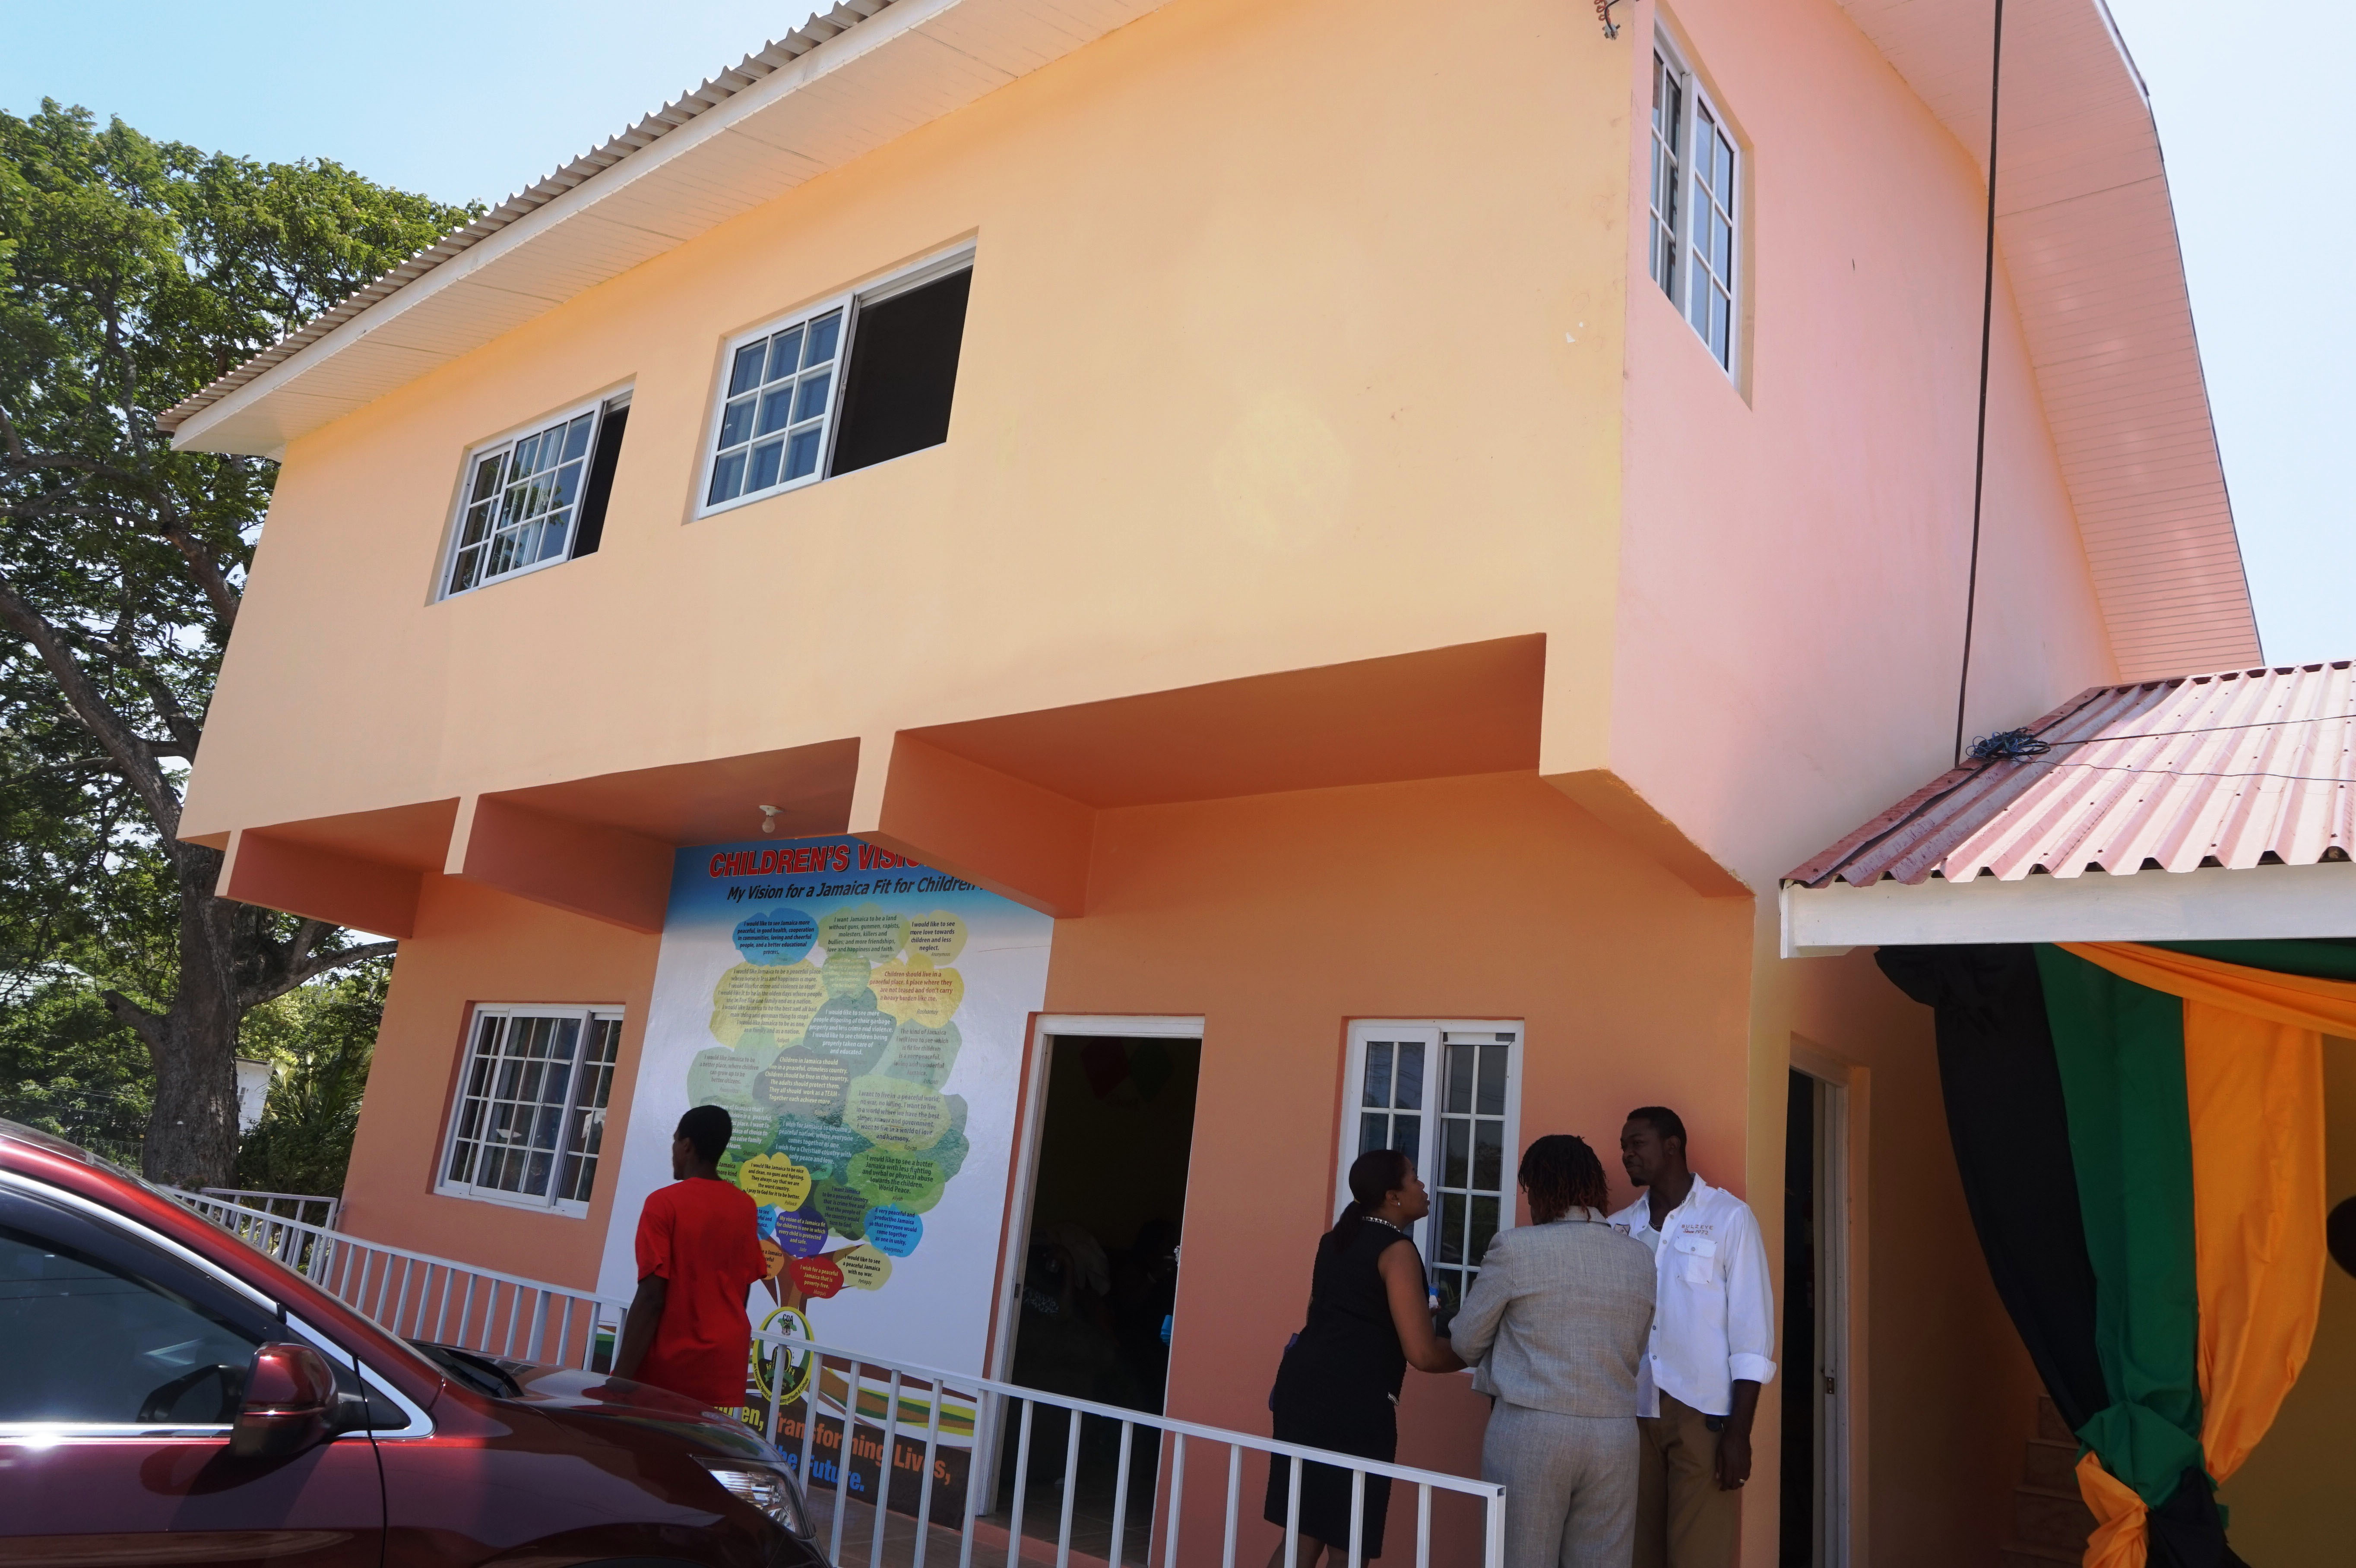 The Newly-Constructed Counseling Centre at the Granville Child Care Facility in Trelawny which was officially opened yesterday (June 24).  The facility was constructed at a cost of over $10 million through donations, and technical and funding support from the Child Development Agency.